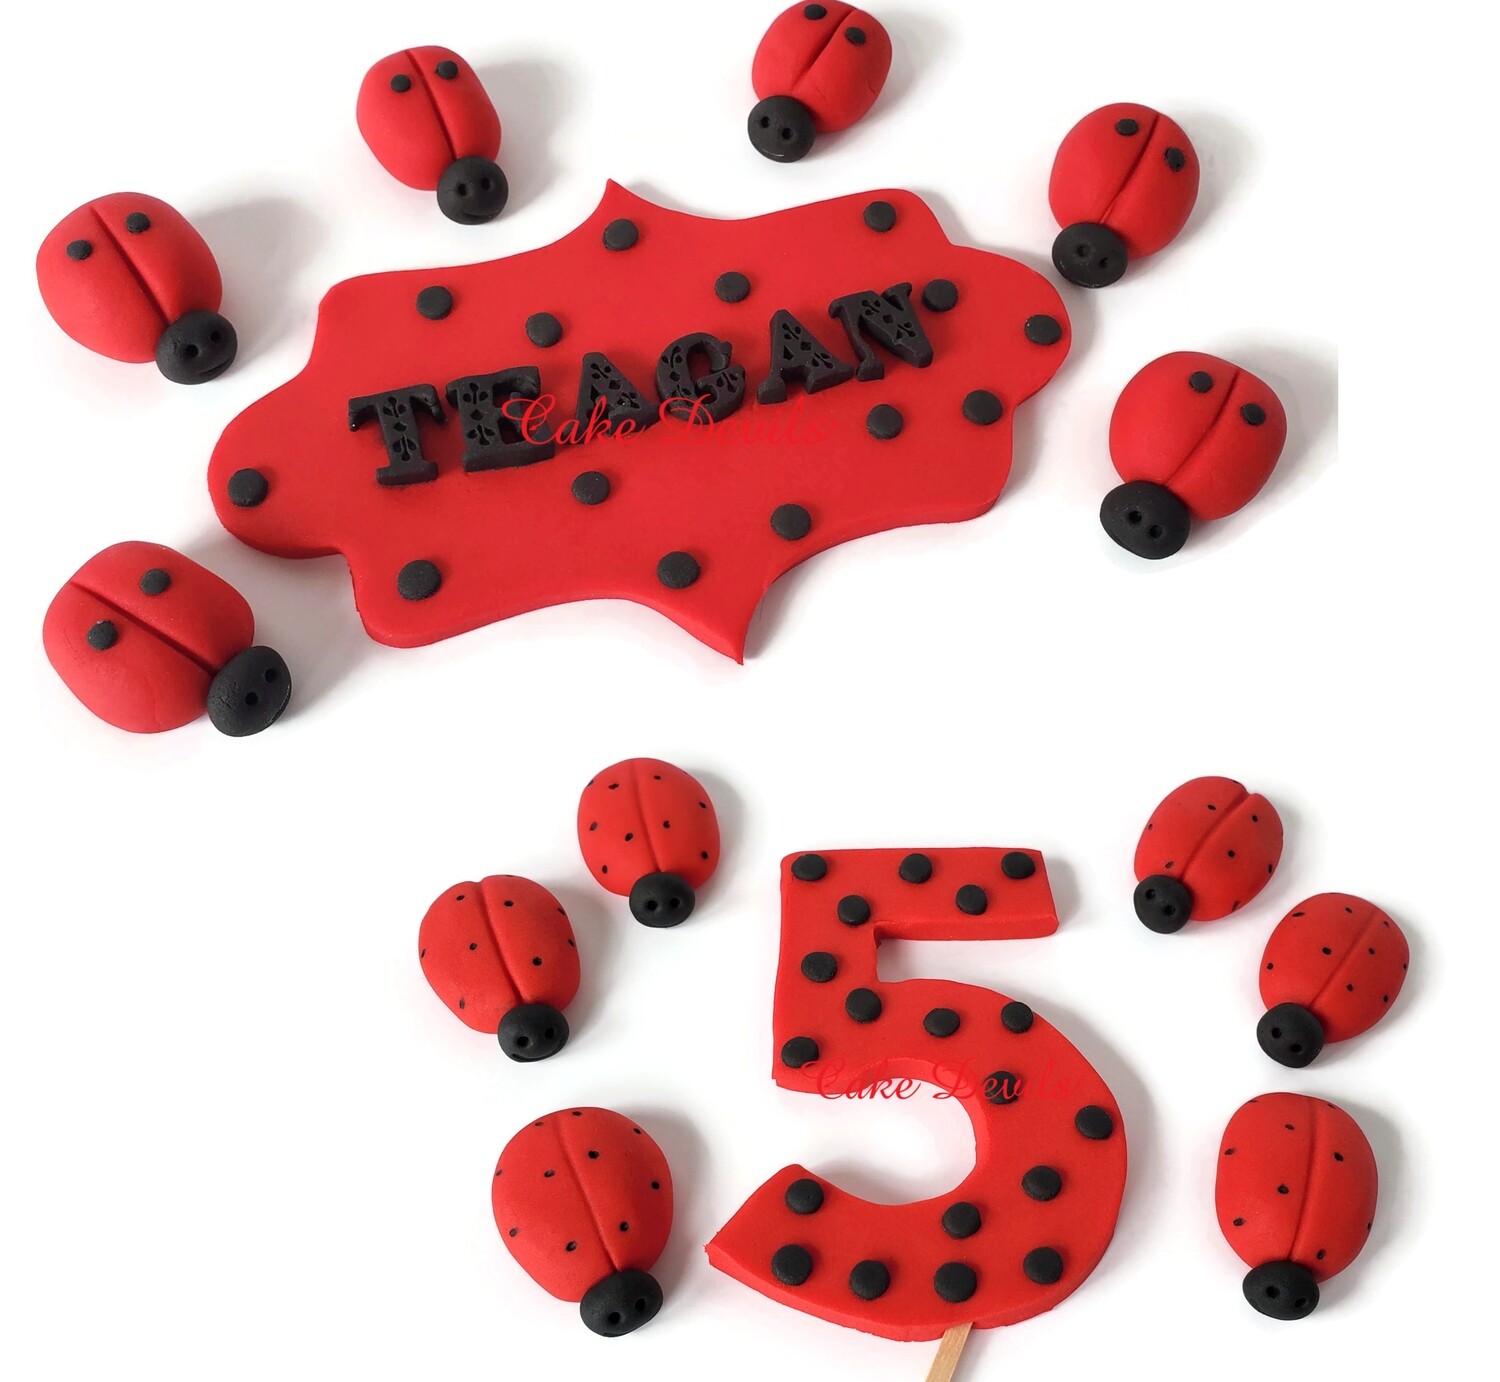 Fondant Ladybug Cake Topper Kit with personalized name plaque and age